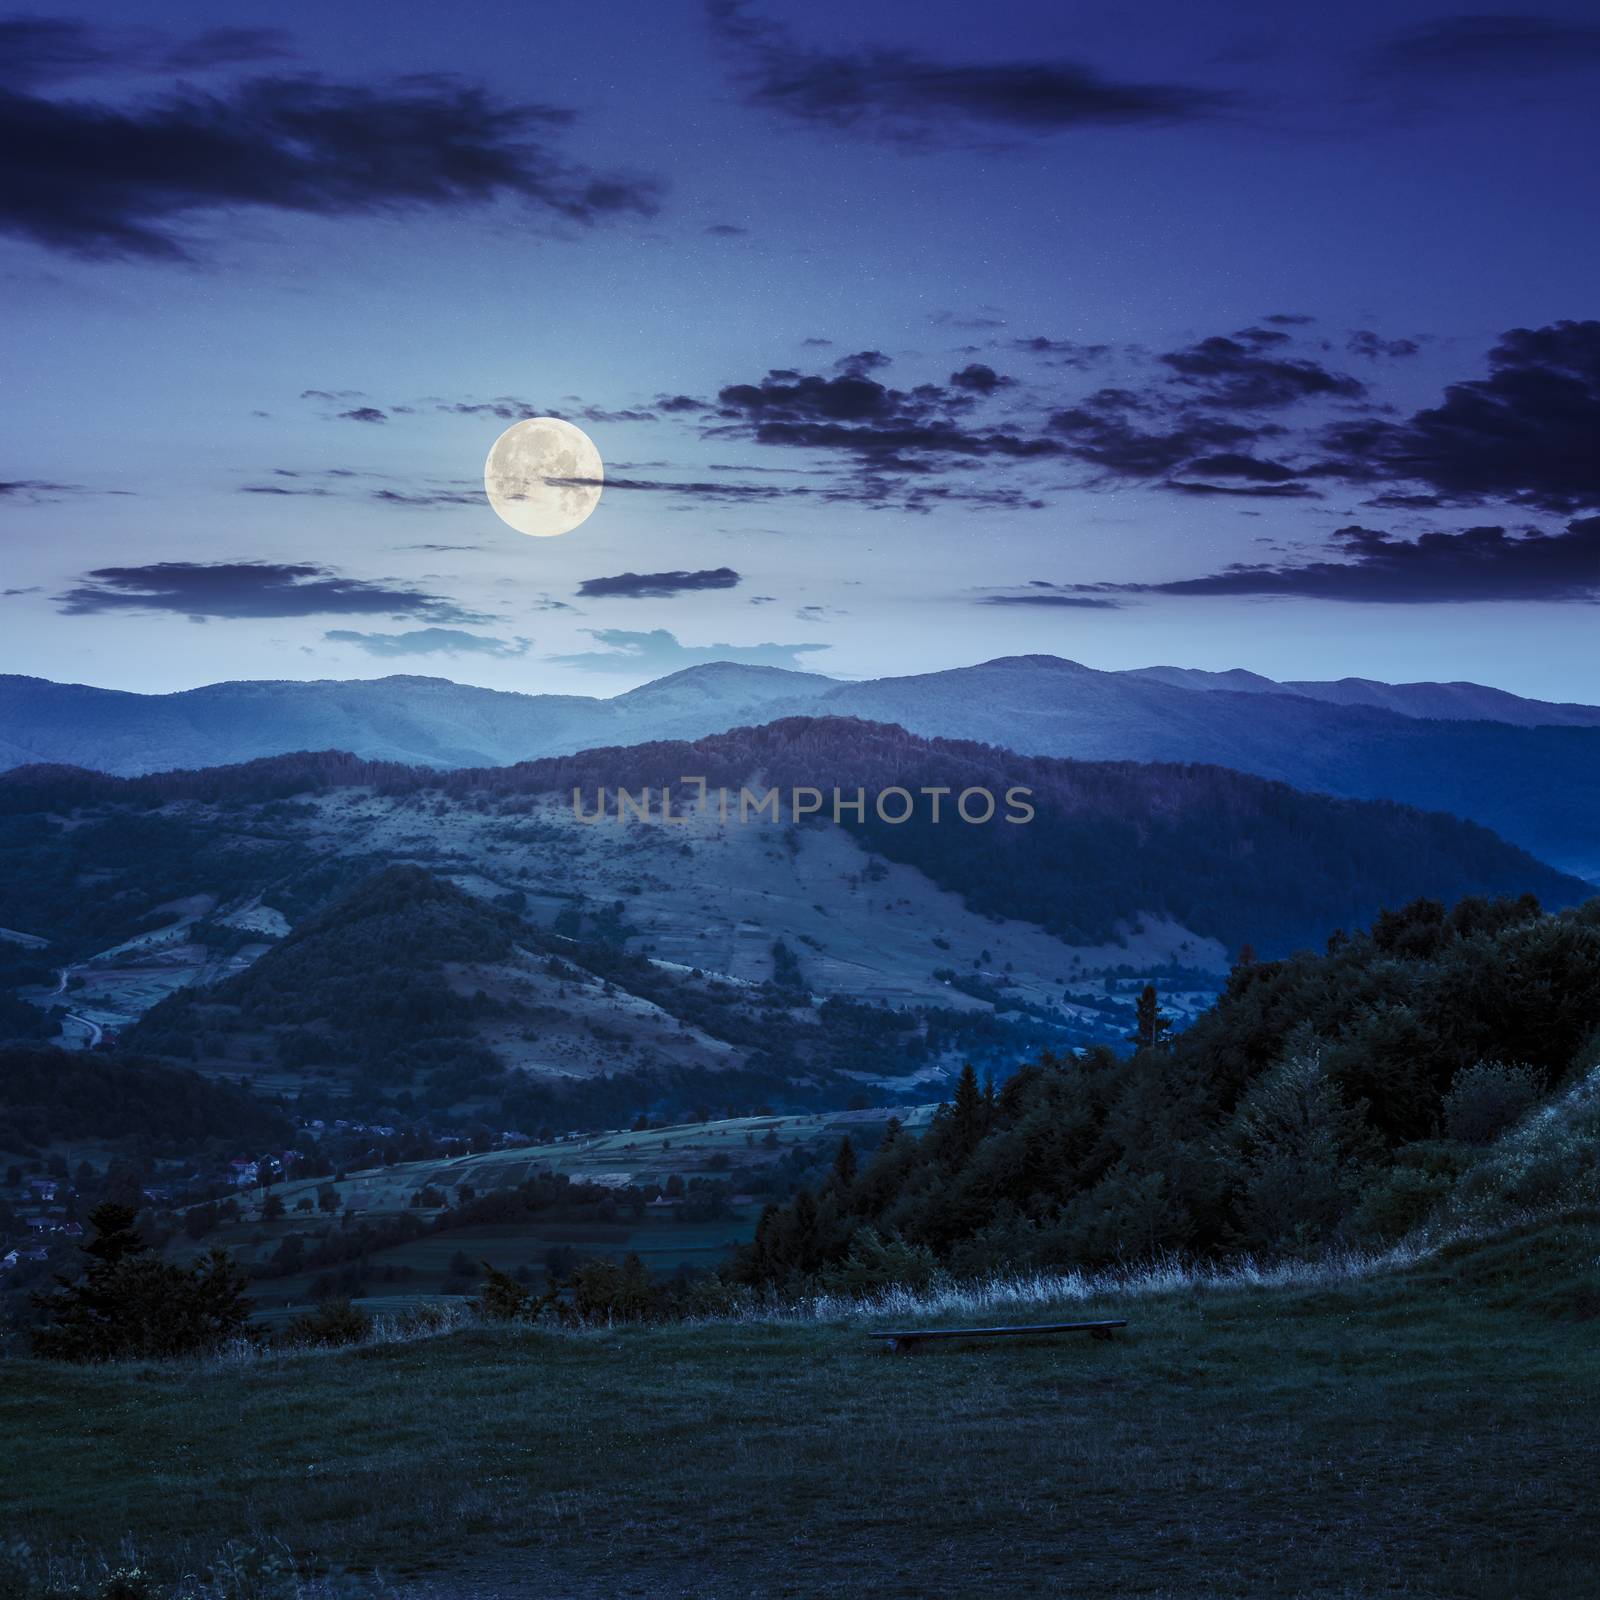 composite summer  landscape. view from hillside to village near forest in high mountains at night in full moon light